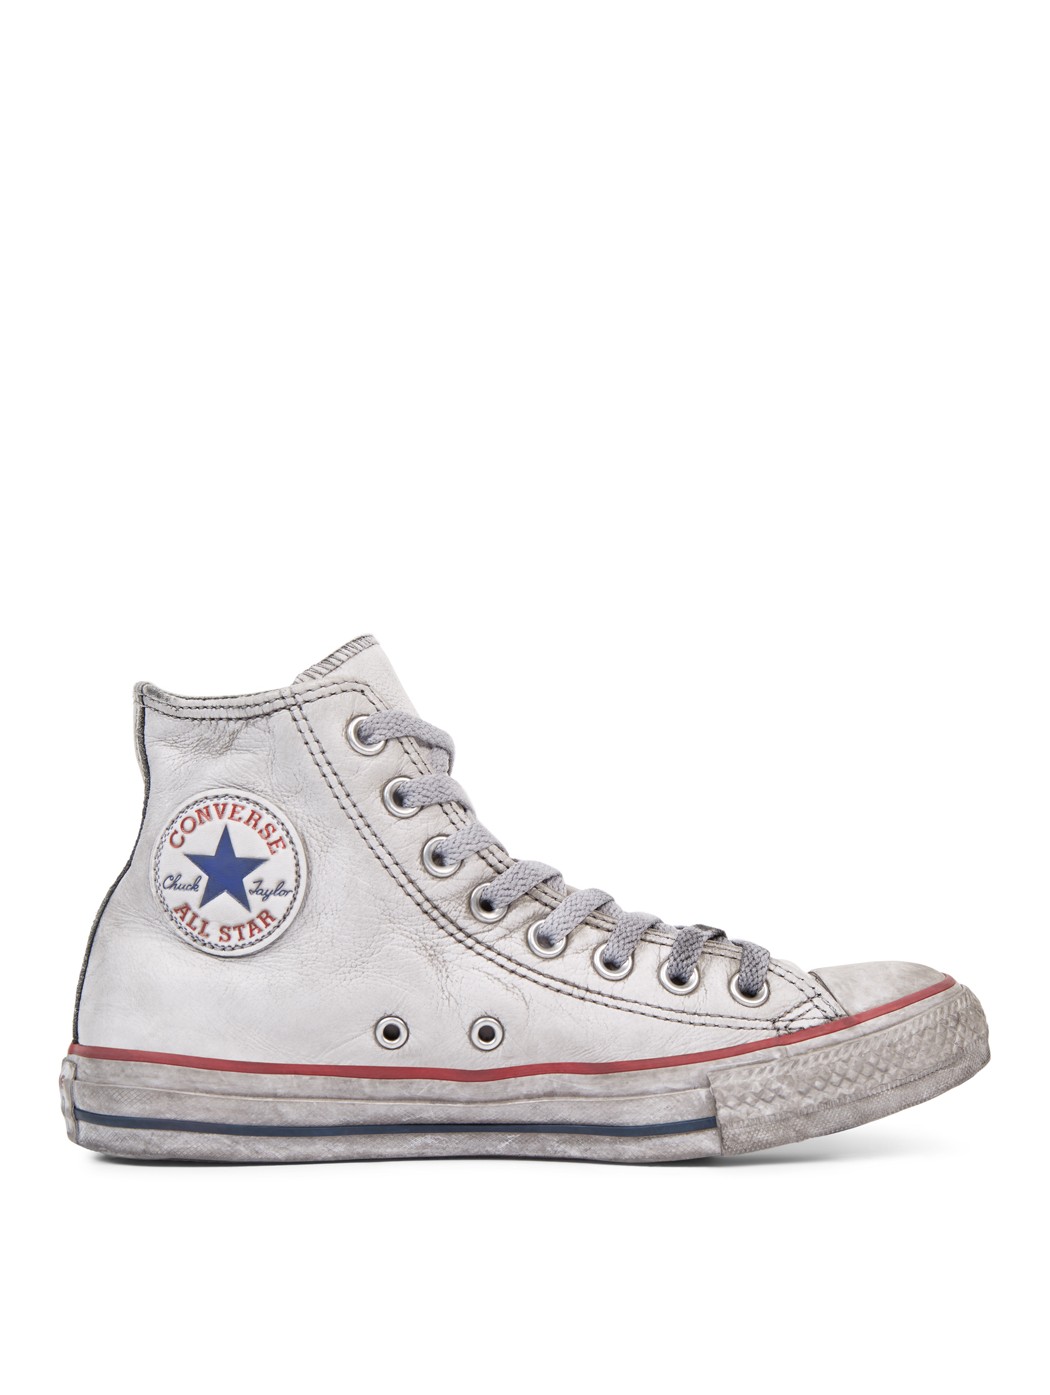 CHUCK TAYLOR ALL STAR VINTAGE LEATHER CONVERSE 158576C